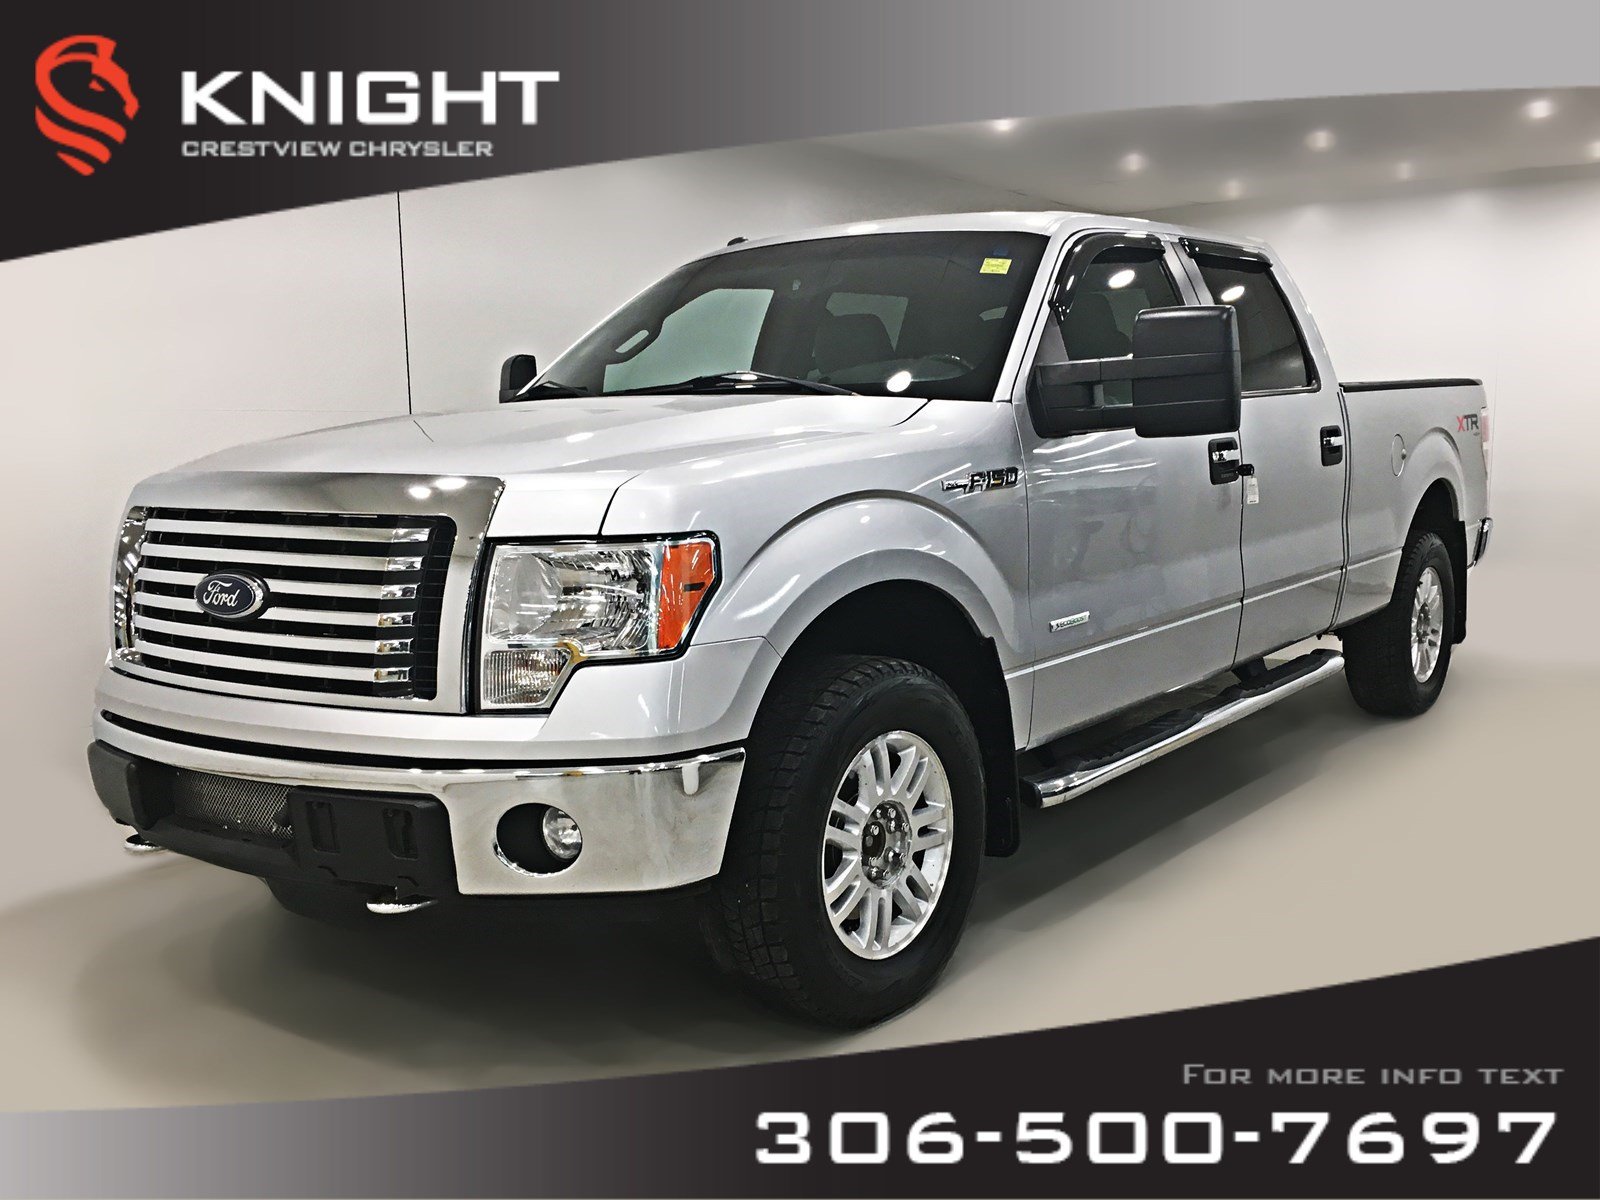 Used 2011 Ford F-150 XLT XTR SuperCrew Crew Cab Pickup near Moose Jaw 2011 Ford F 150 Xtr Towing Capacity